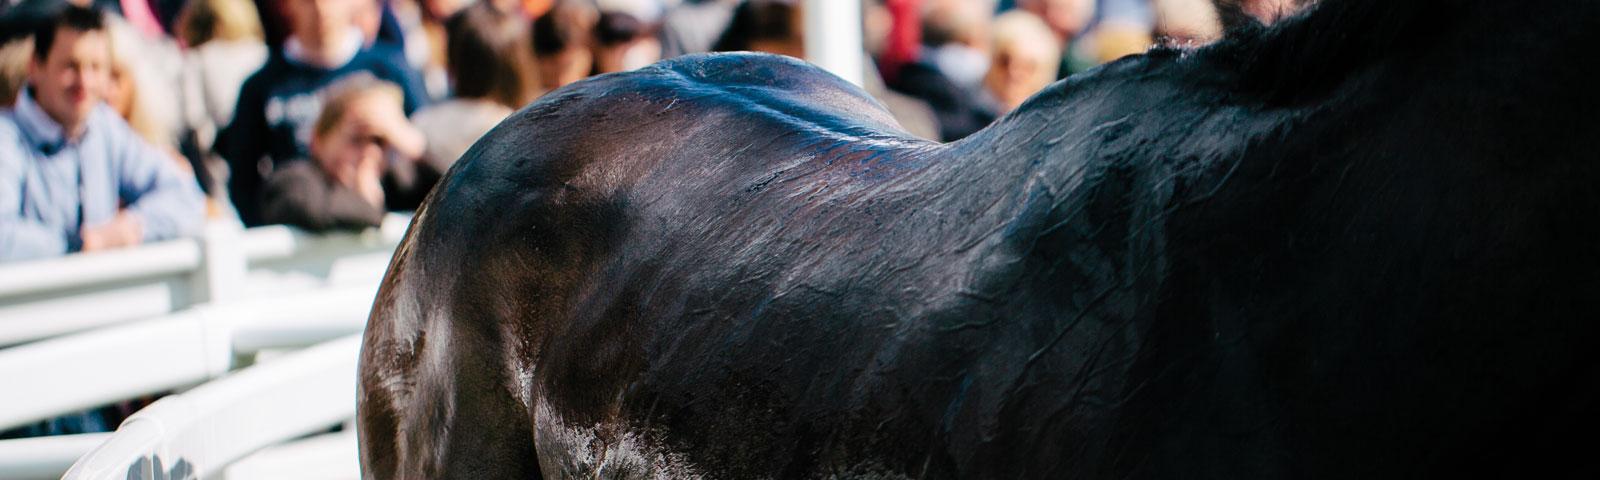 Extreme close up of a horse.